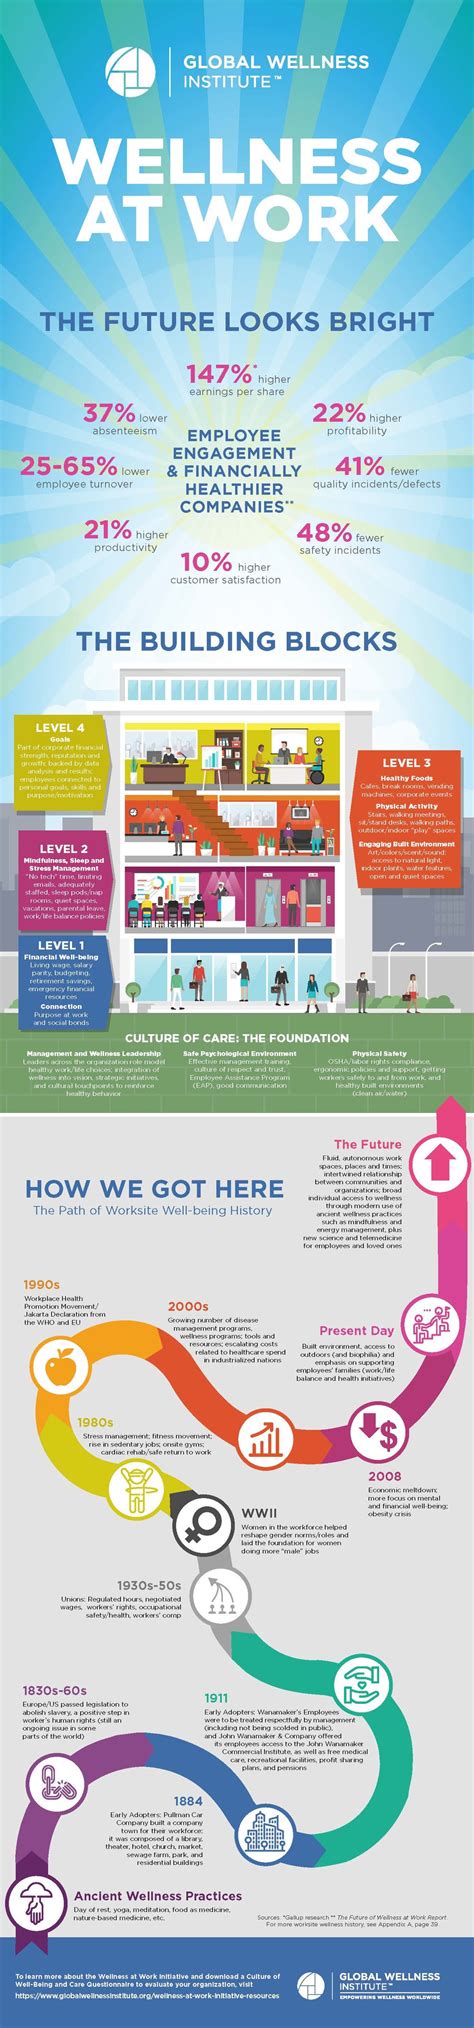 Workplace Wellbeing Infographic - Global Wellness Institute